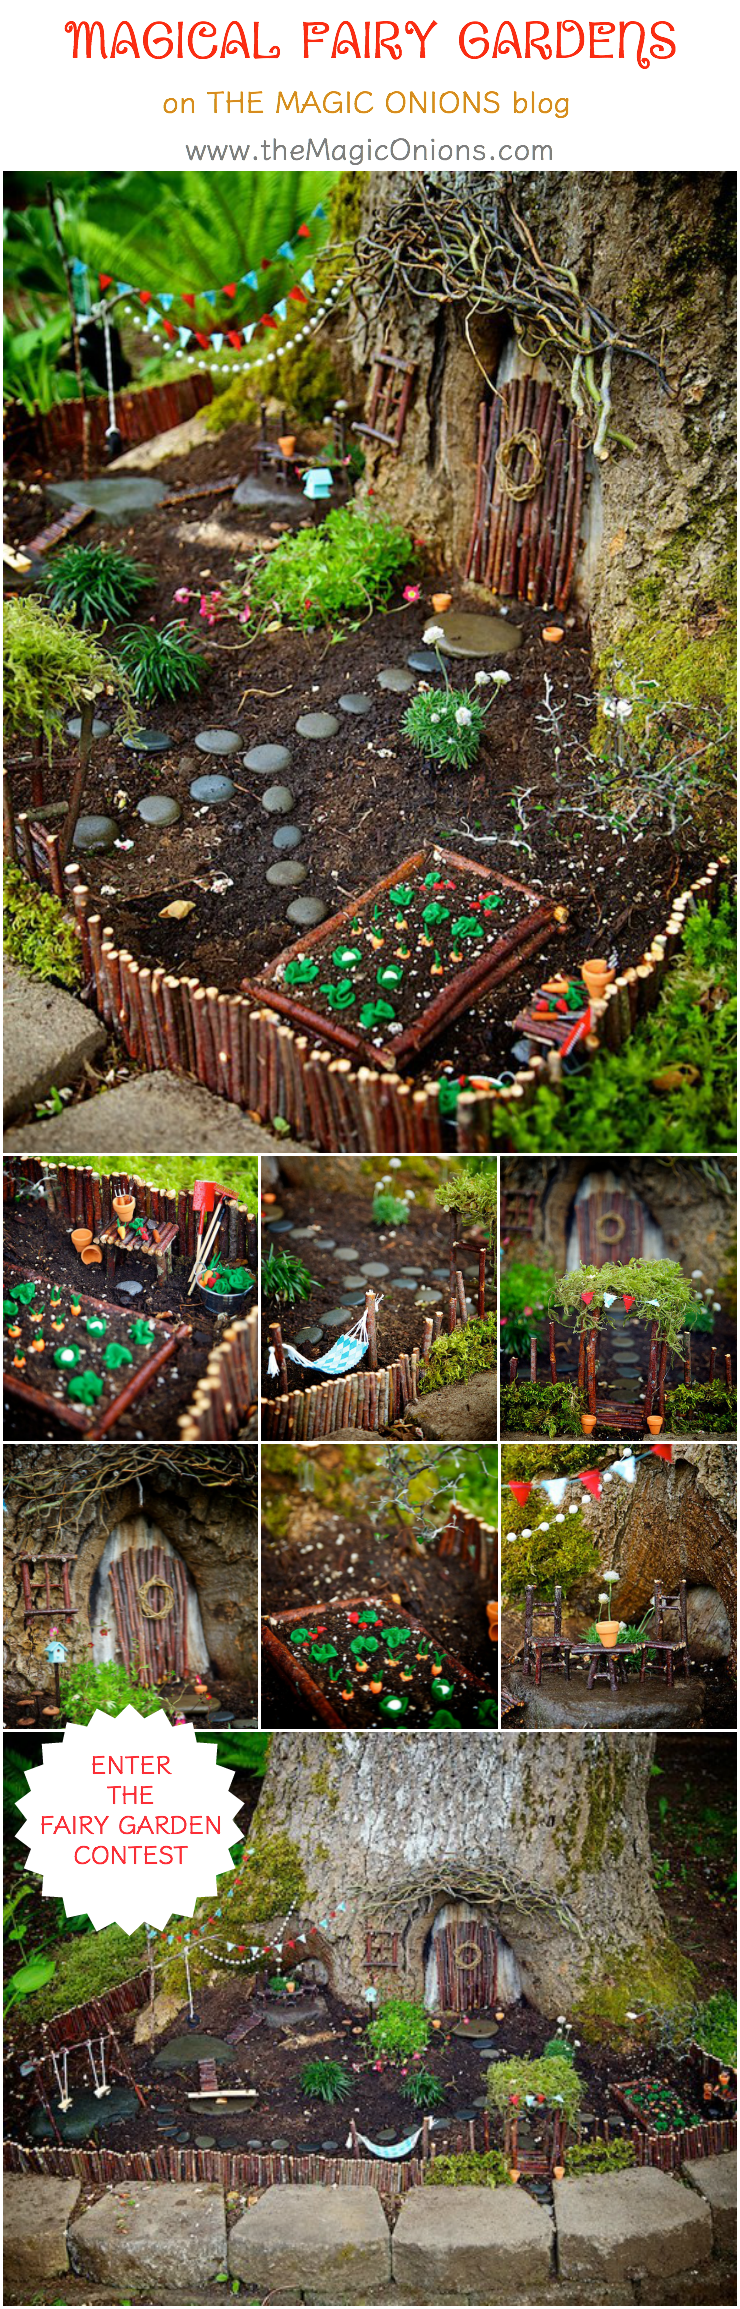 Come and see the most MAGICAL fairy gardens on The Magic Onions blog. This is the winner of the 2105 Fairy Garden Contest. Isn't it delightful!